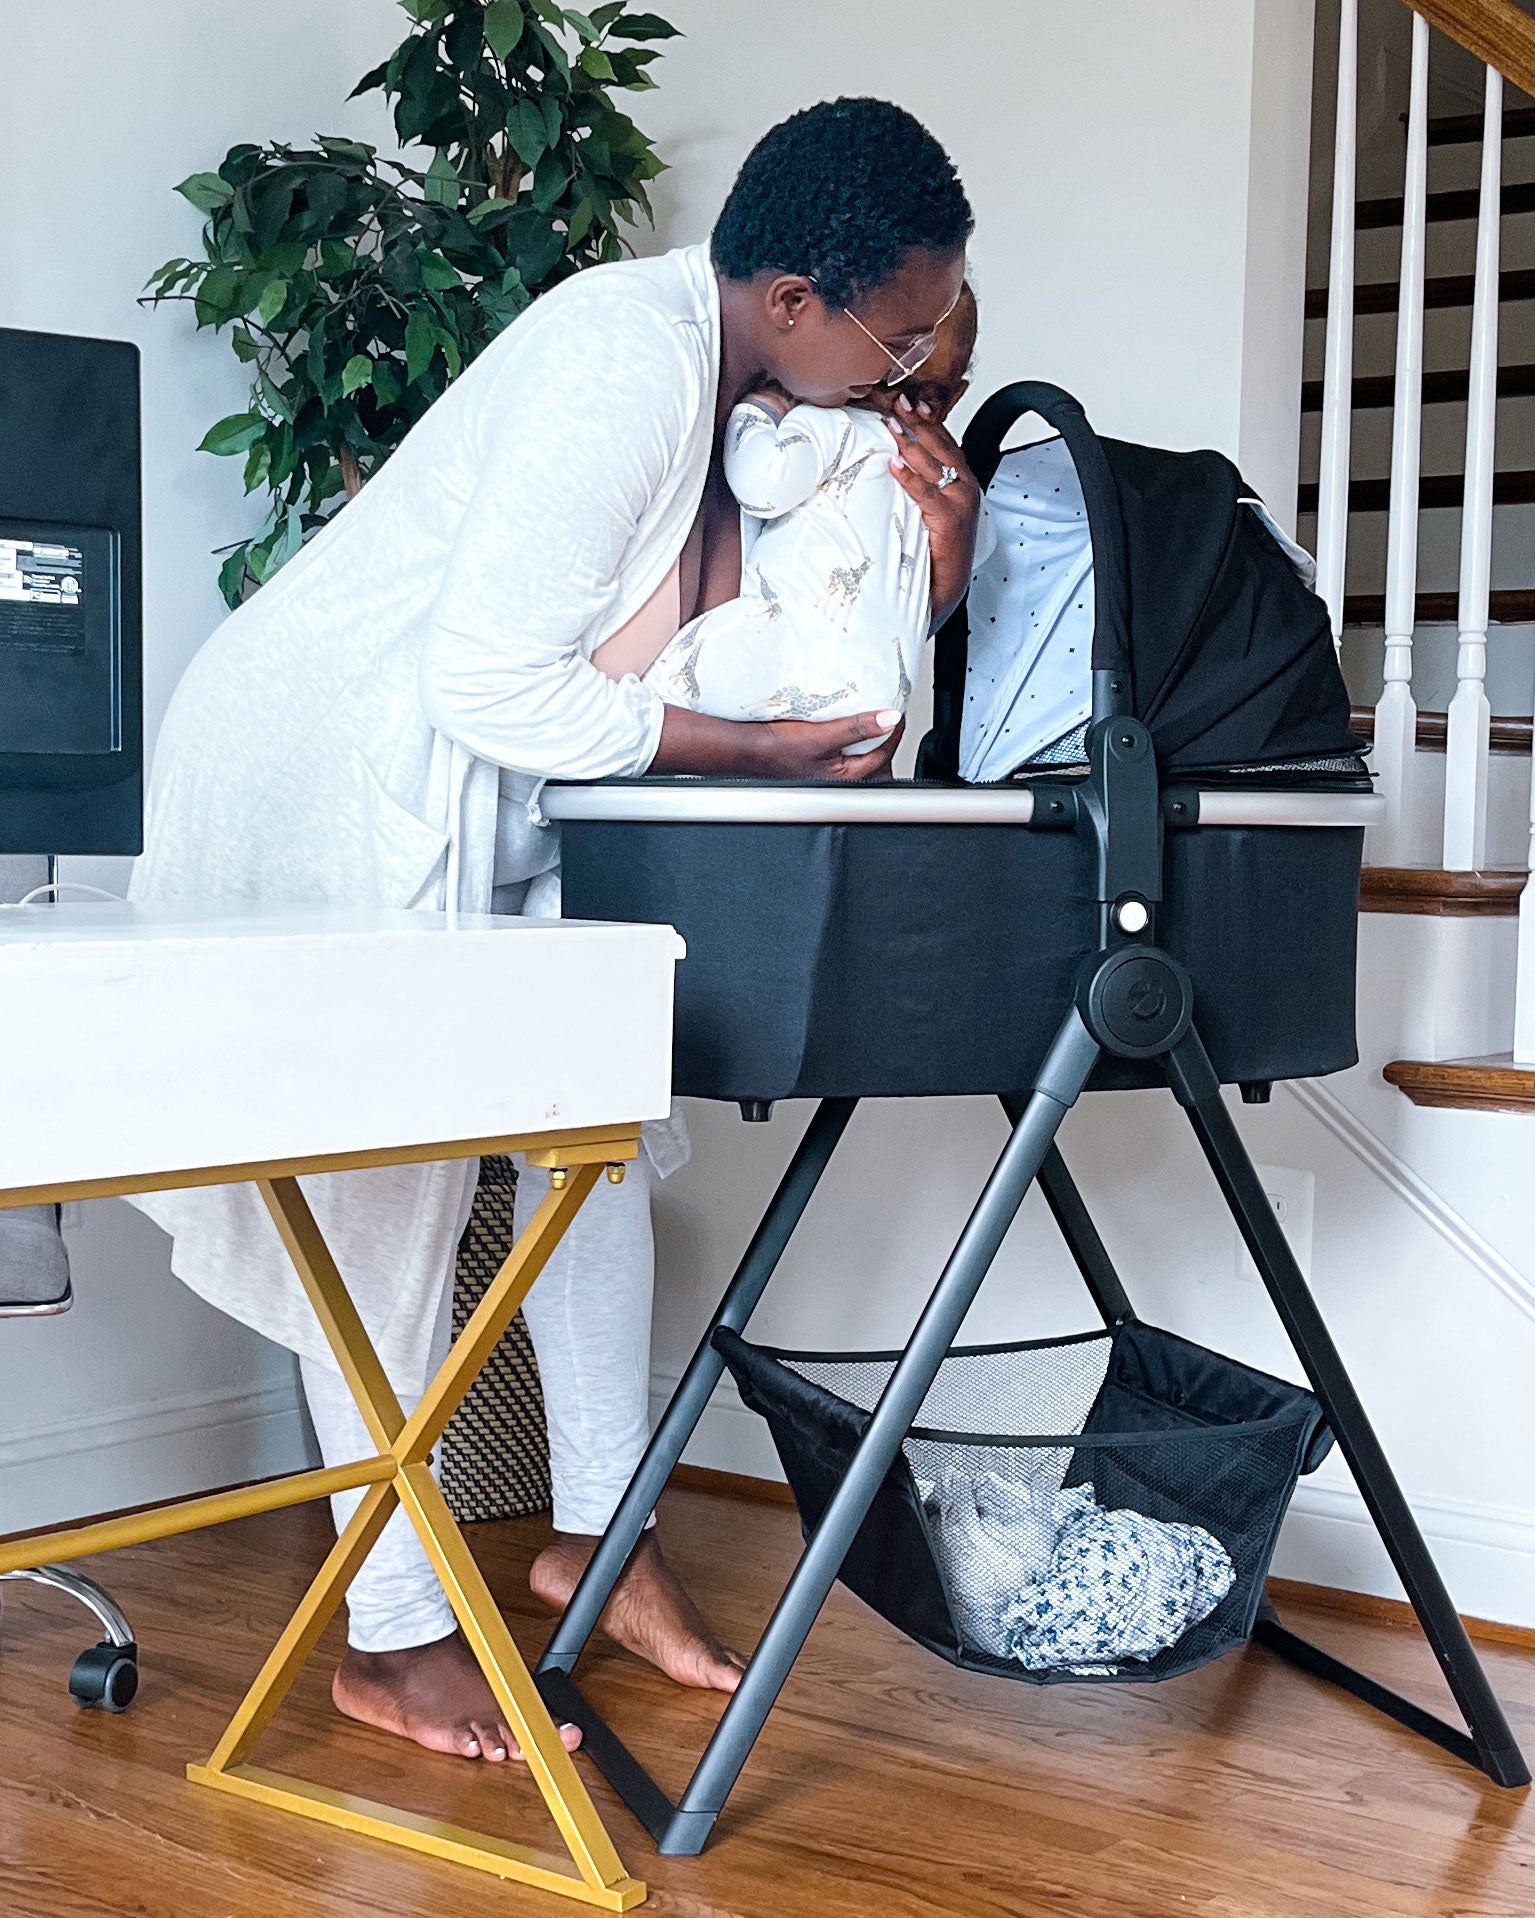 A woman in a white robe kisses a baby cradled in a mockingbird-prod bassinet stand while standing at a home office desk with a computer and a plant.